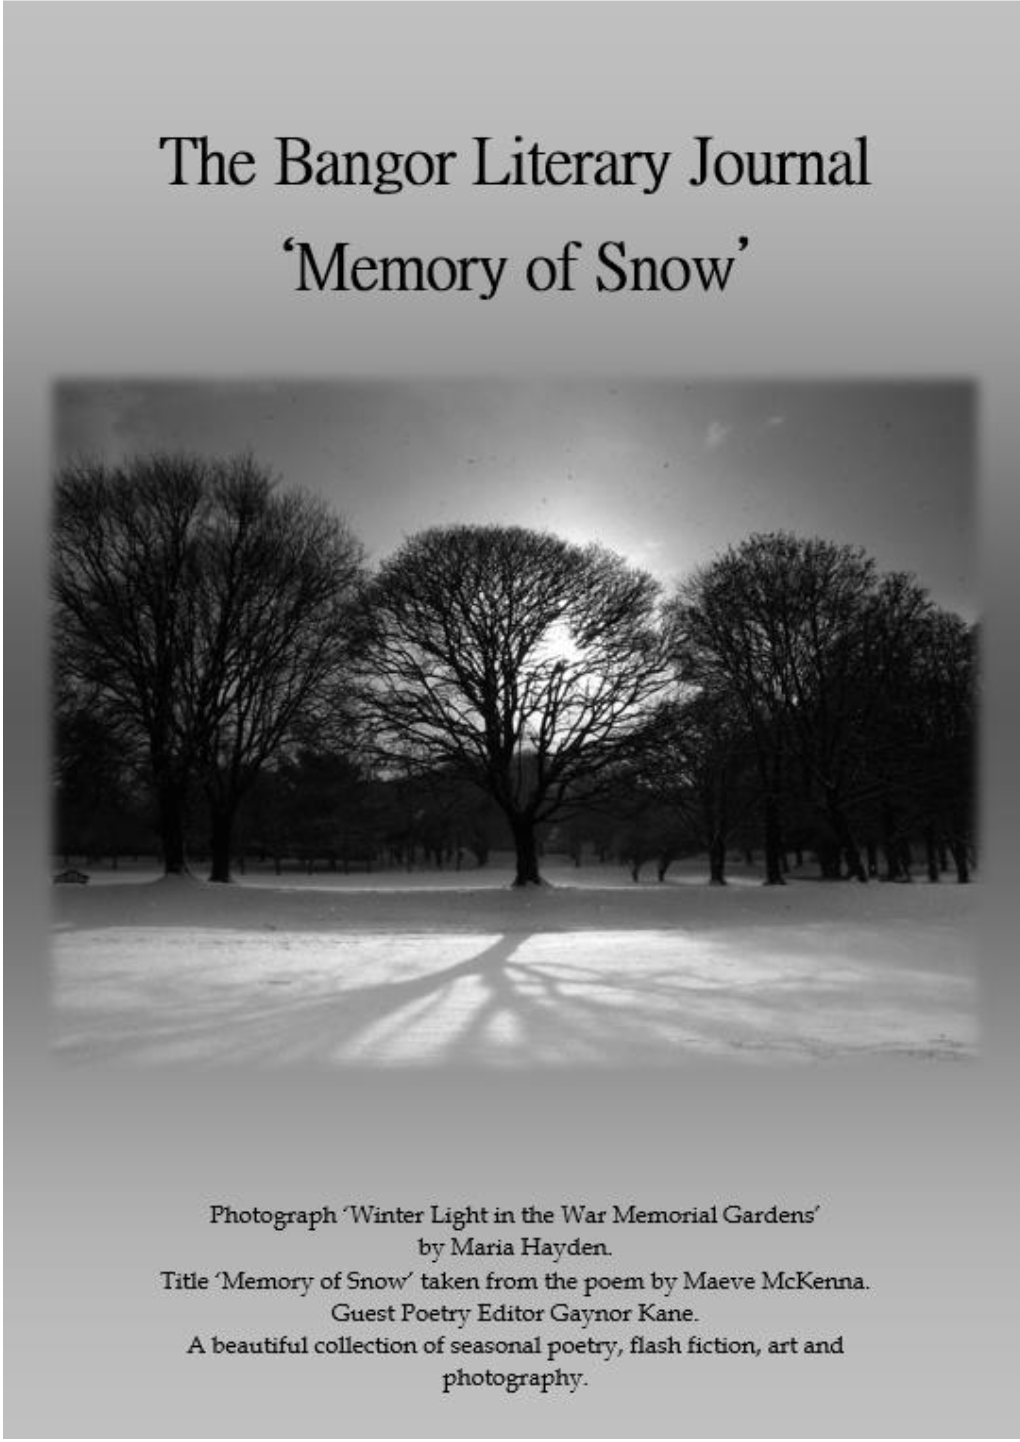 Memory of Snow’ Was Taken from the Powerful Poem by Maeve Mckenna; While the Stunning Cover Image Was Photographed by Maria Hayden